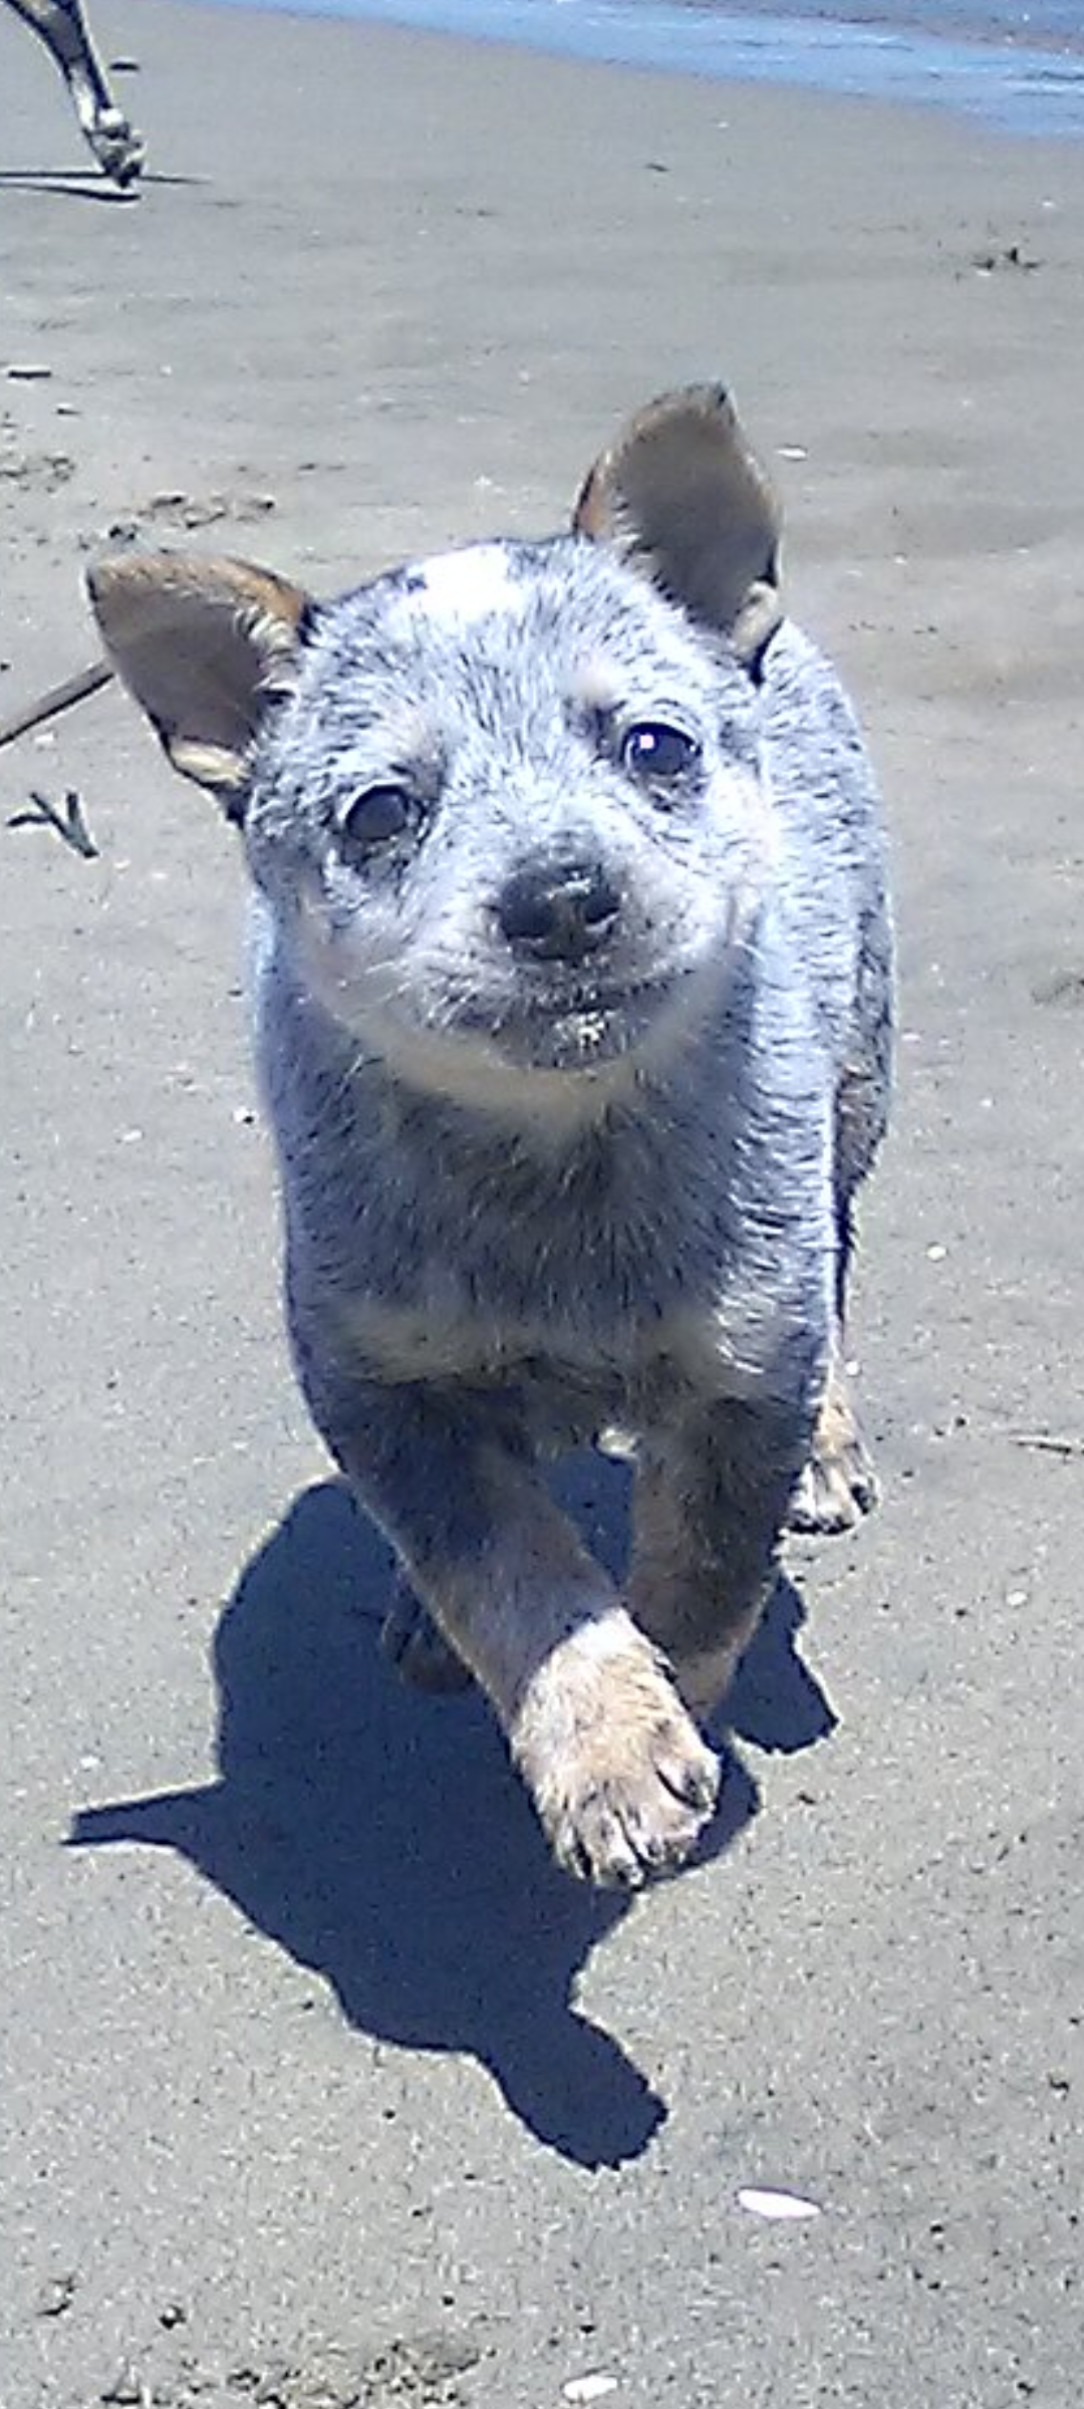 Otto loved the beach as a baby!